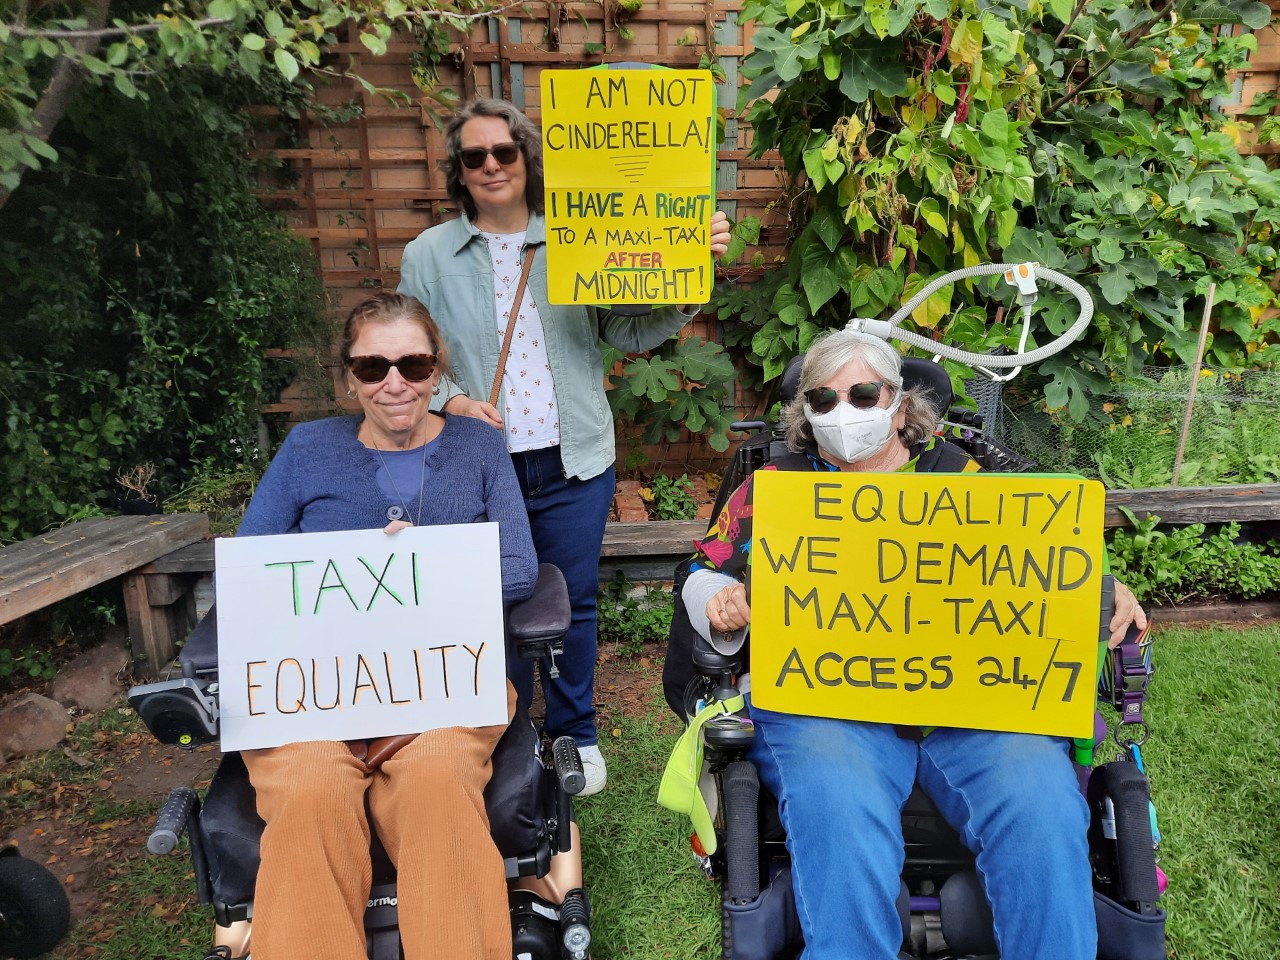 Three women in a backyard holding protest signs. Two of the women use motorised wheelchairs. One wears a mask. The signs say: "I am not Cinderella! I have a right to a maxi-taxi after midnight", "Taxi Equality" and "Equality! We demand maxi-taxi access 24/7".